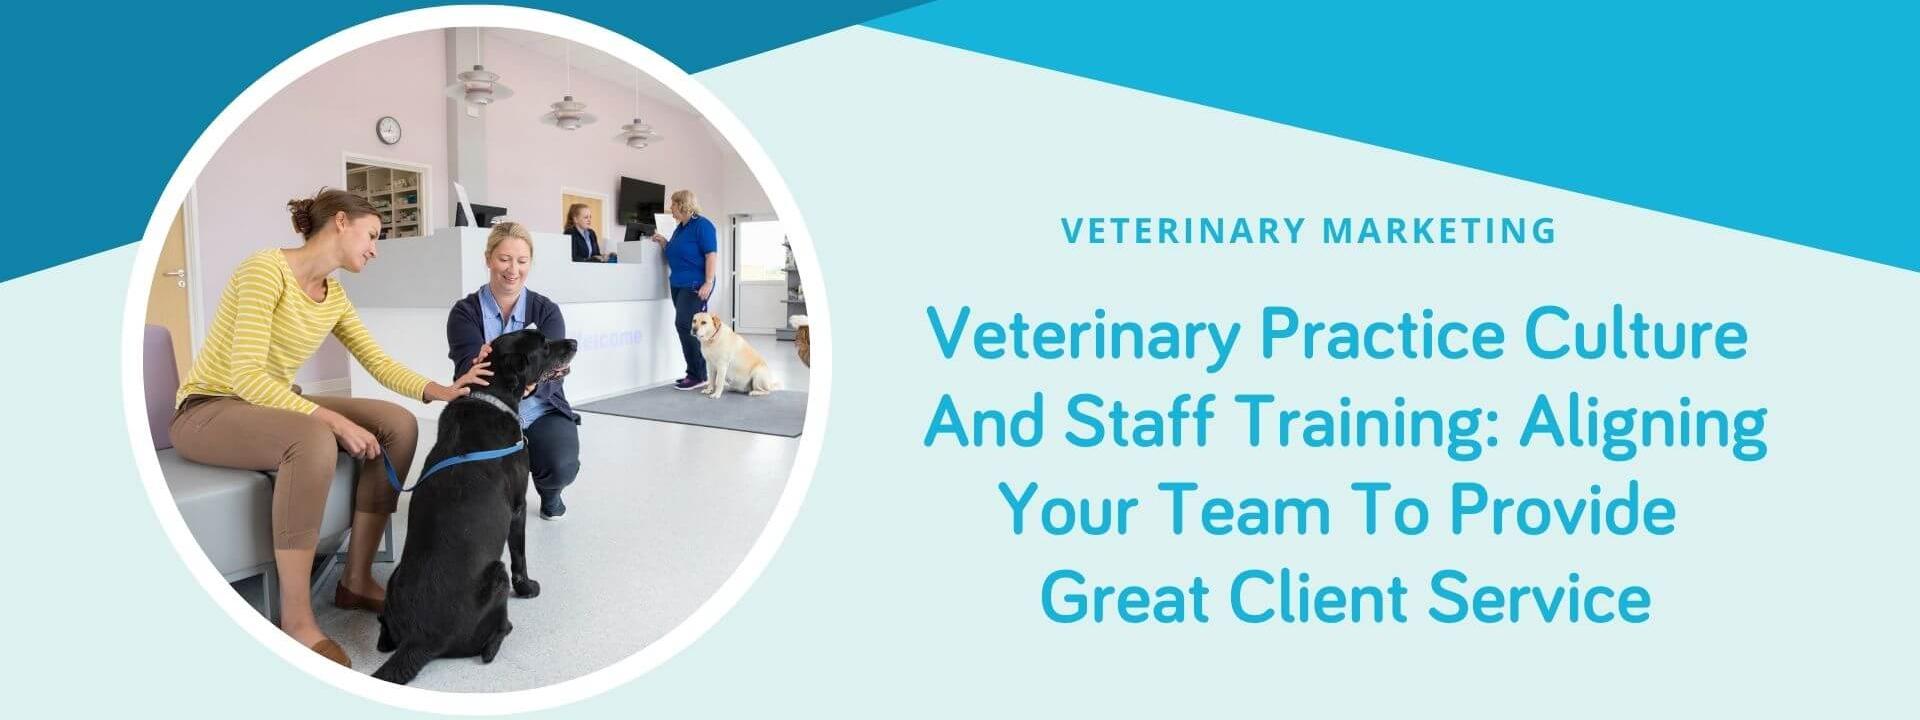 Veterinary Practice Culture and Staff Training: Aligning Your Team to Provide Great Client Service